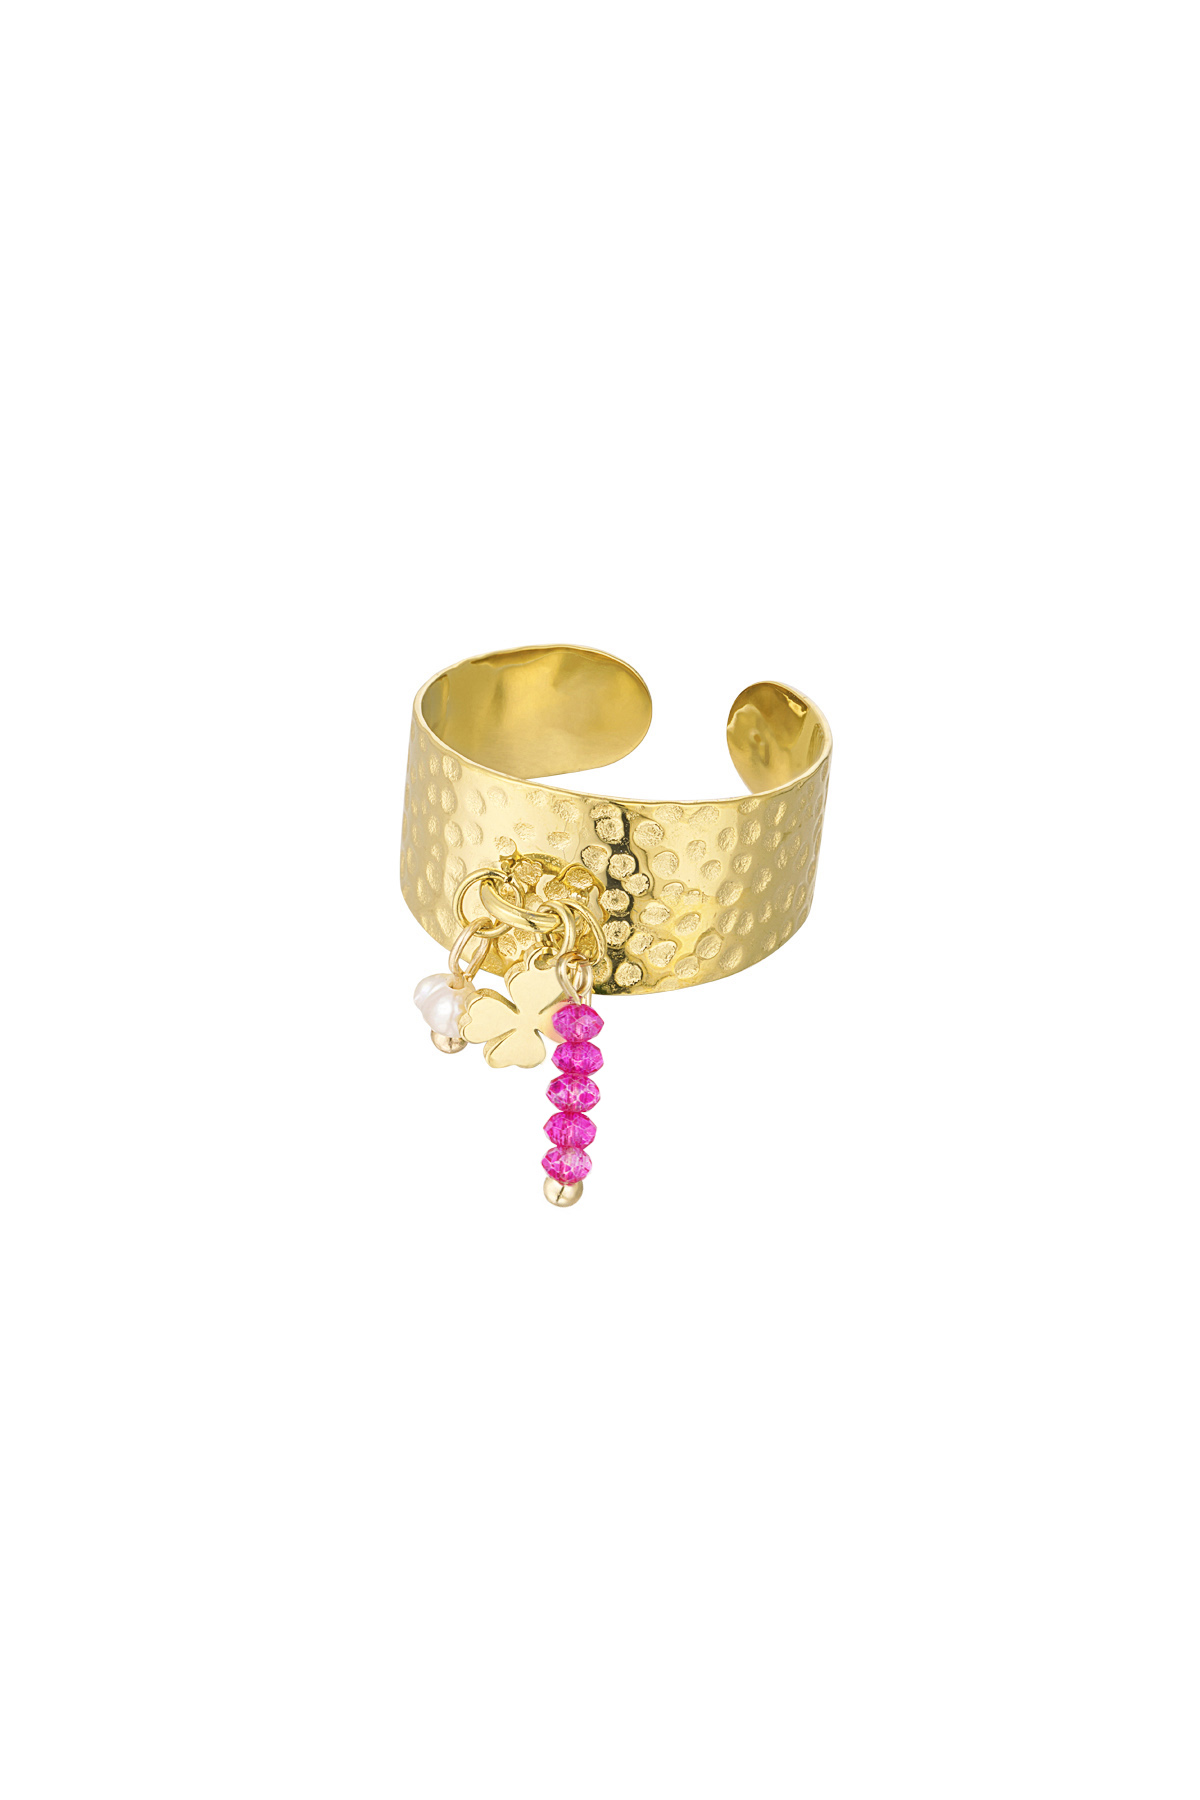 Statement ring with charms - fuchsia